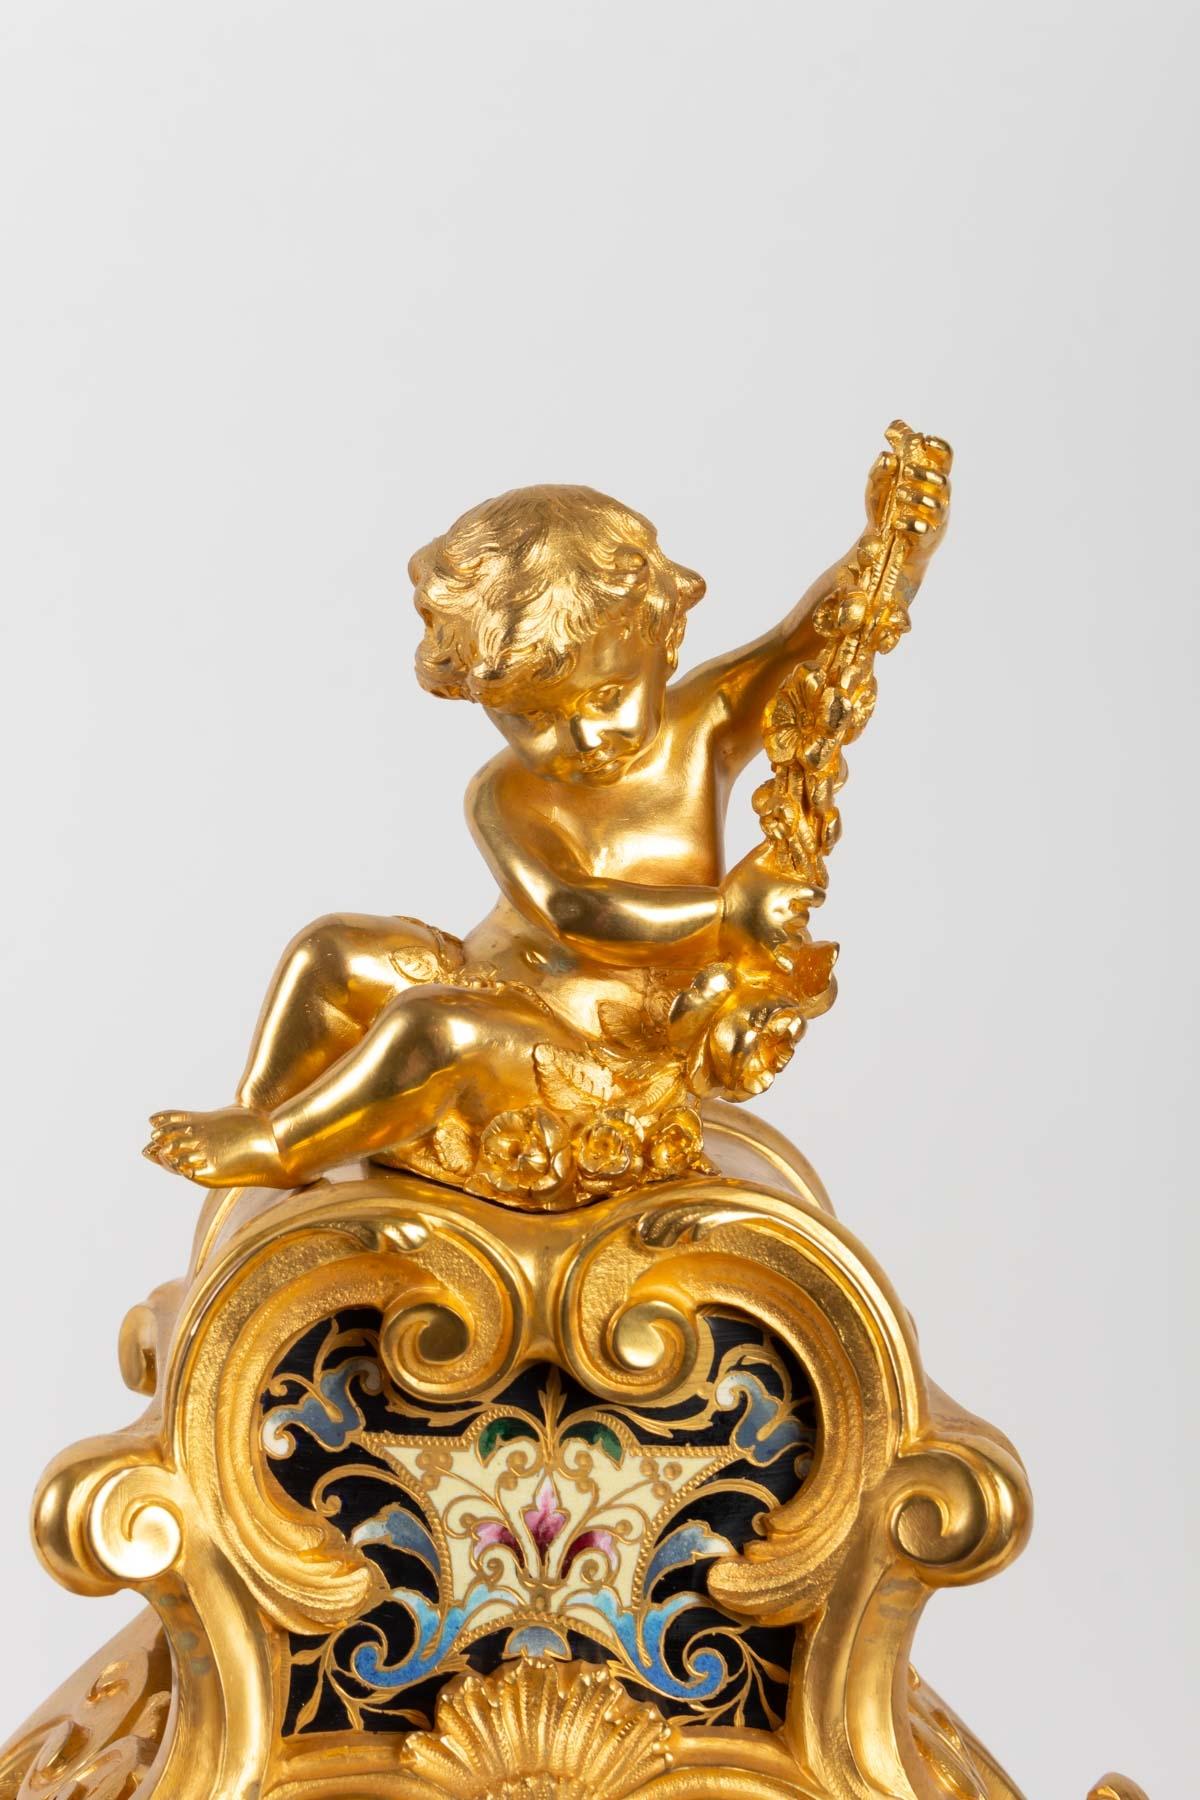 French Mantel Clock, 19th Century, Gilded Bronze, Enamelled and Cloisonné, Napoleon II